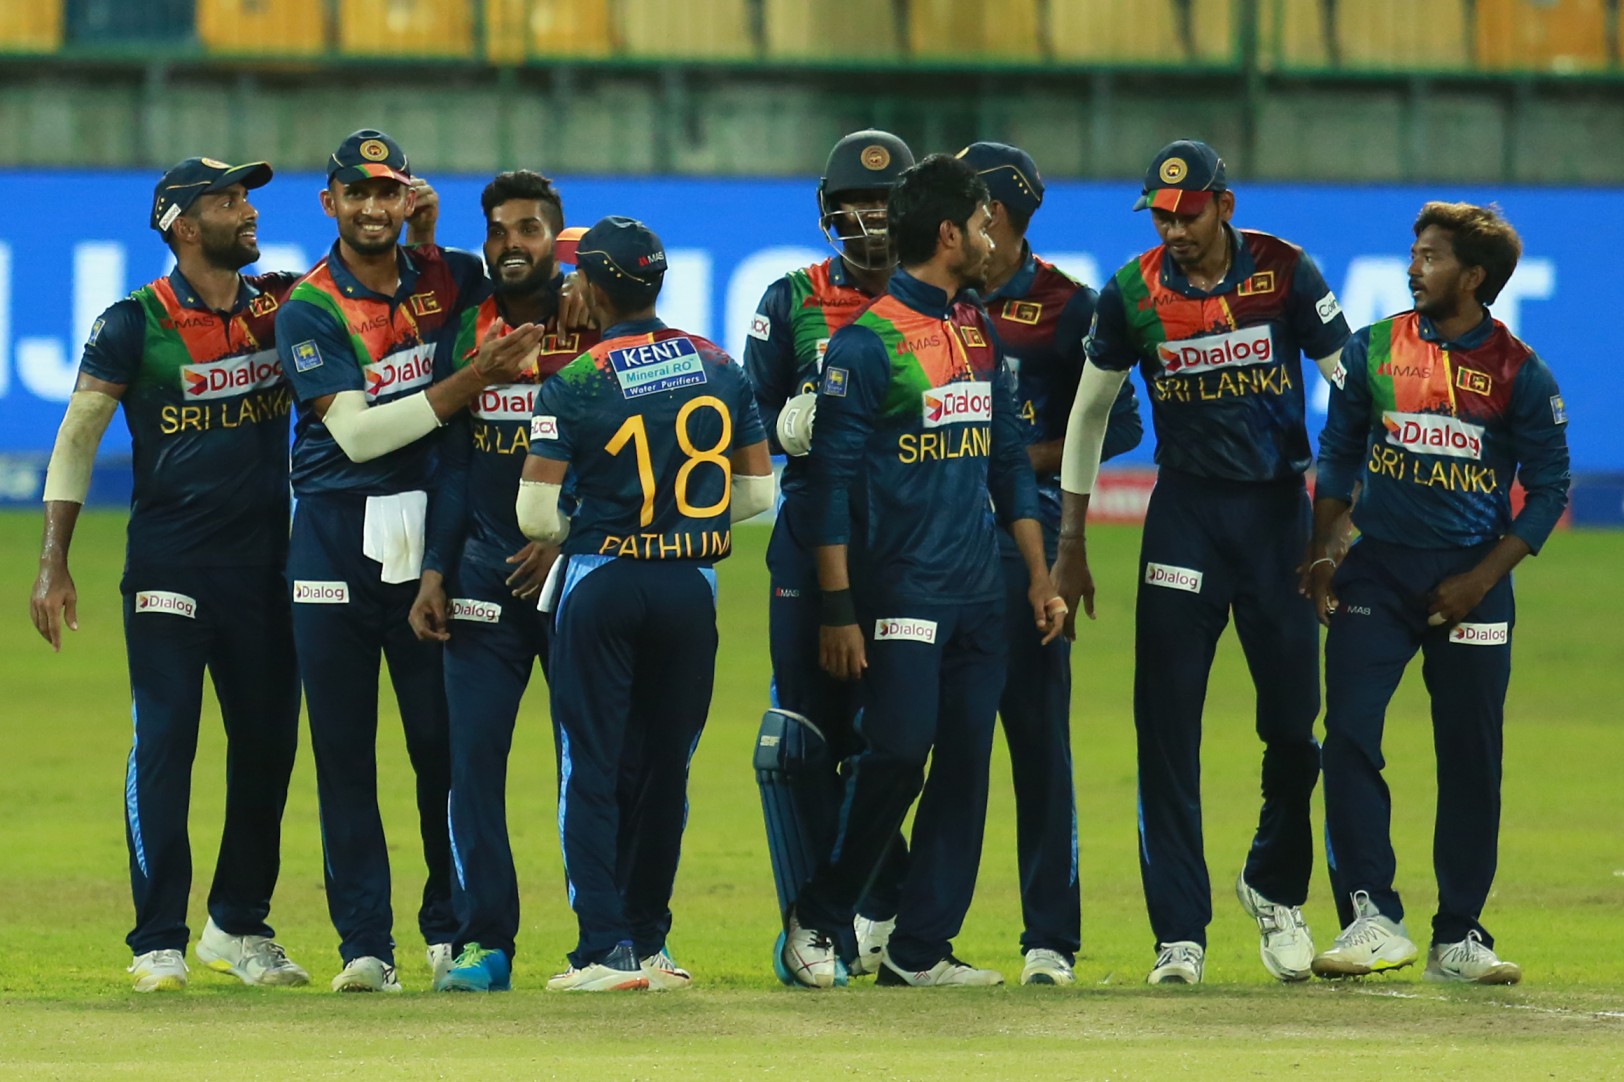 SL vs IND | 3rd T20I: SC’s Sedentary Review - SL taste victory again as IND forget the art of batting